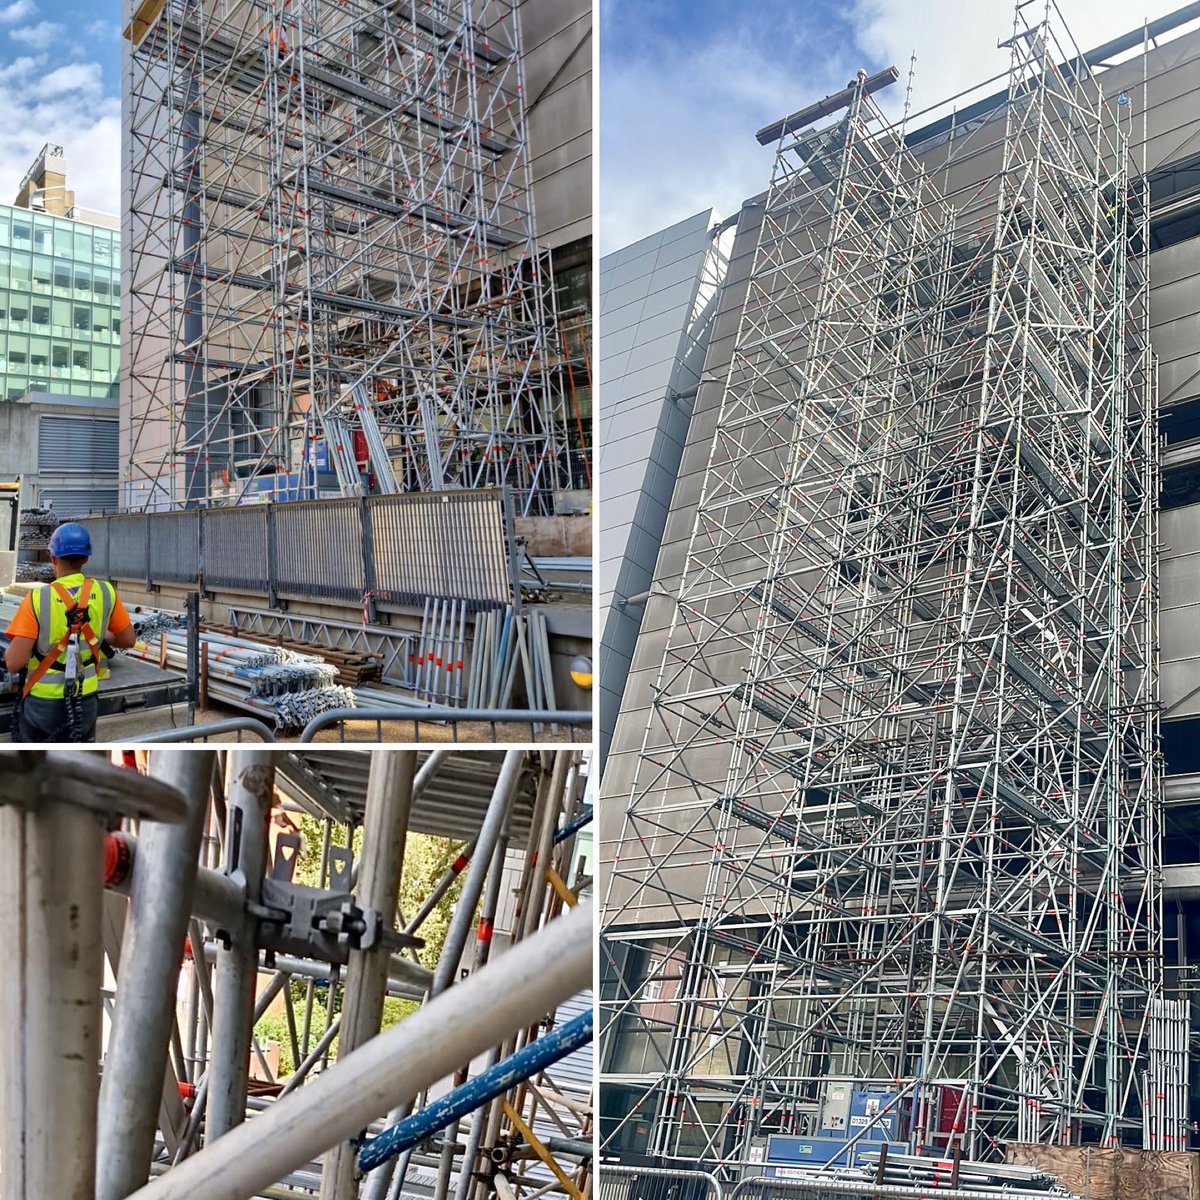 Science Museum London.
32 m high Layher Allround loading gantry.  Ties made using aluminium 450 Layher beams connected to steel beams off twin wedge couplers.
#brownesscaffolding #layheruk #strategicpartnership #morepossibilities #innovation